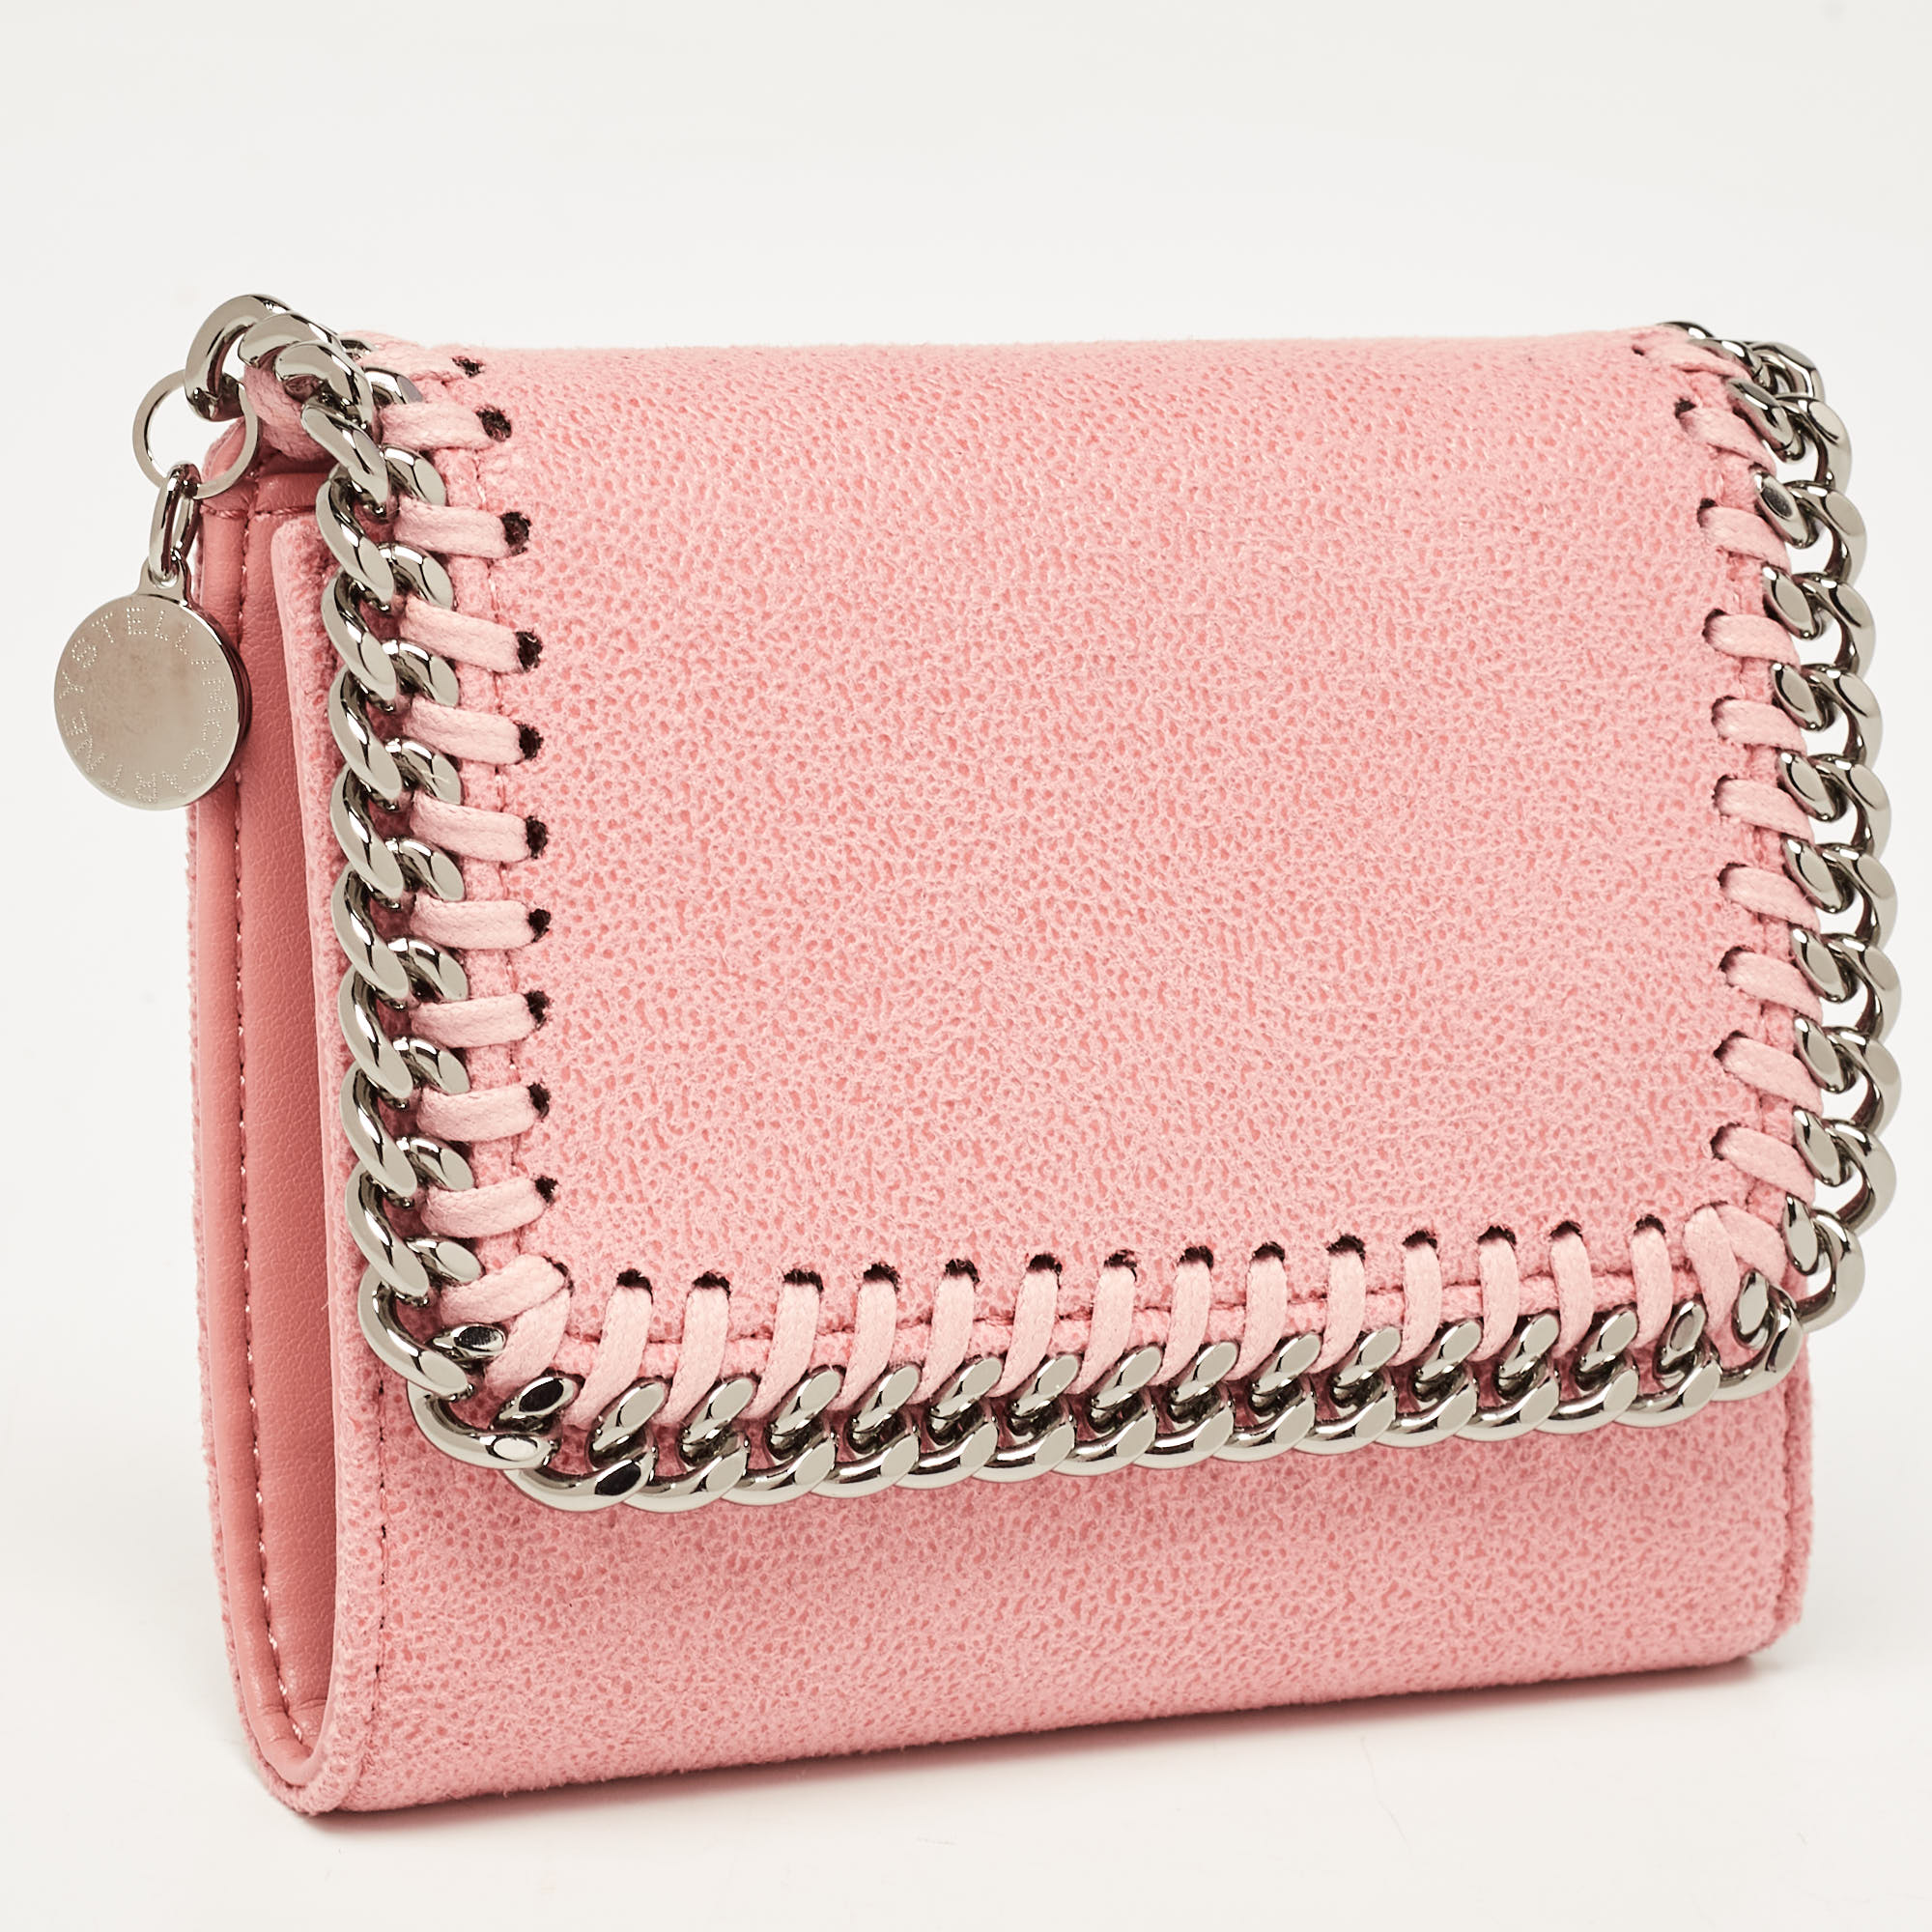 Stella McCartney Pink Faux Leather Falabella Compact Wallet